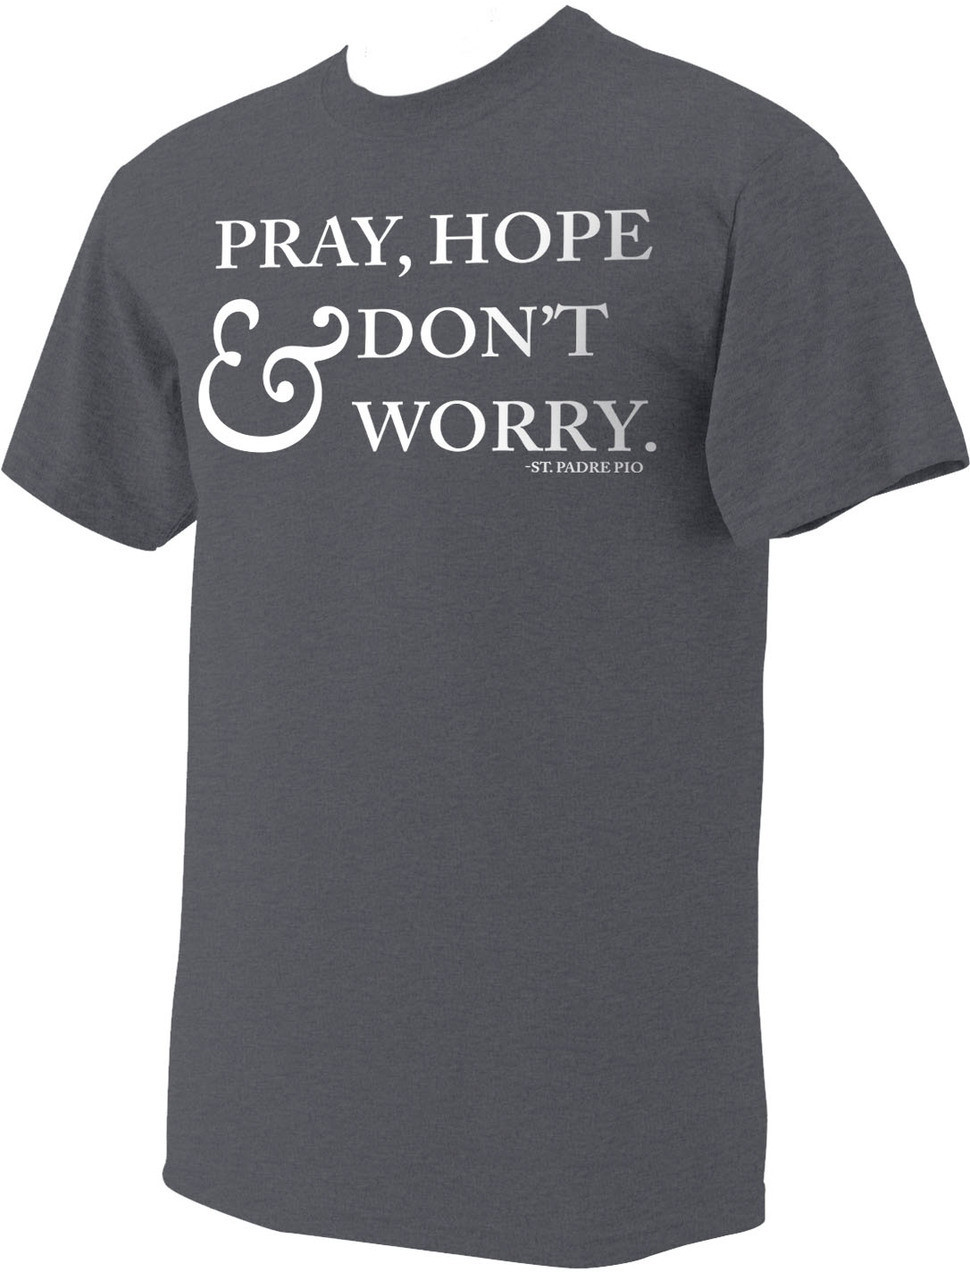 "Pray, Hope & Don't Worry" St. Padre Pio Heather Charcoal T-Shirt